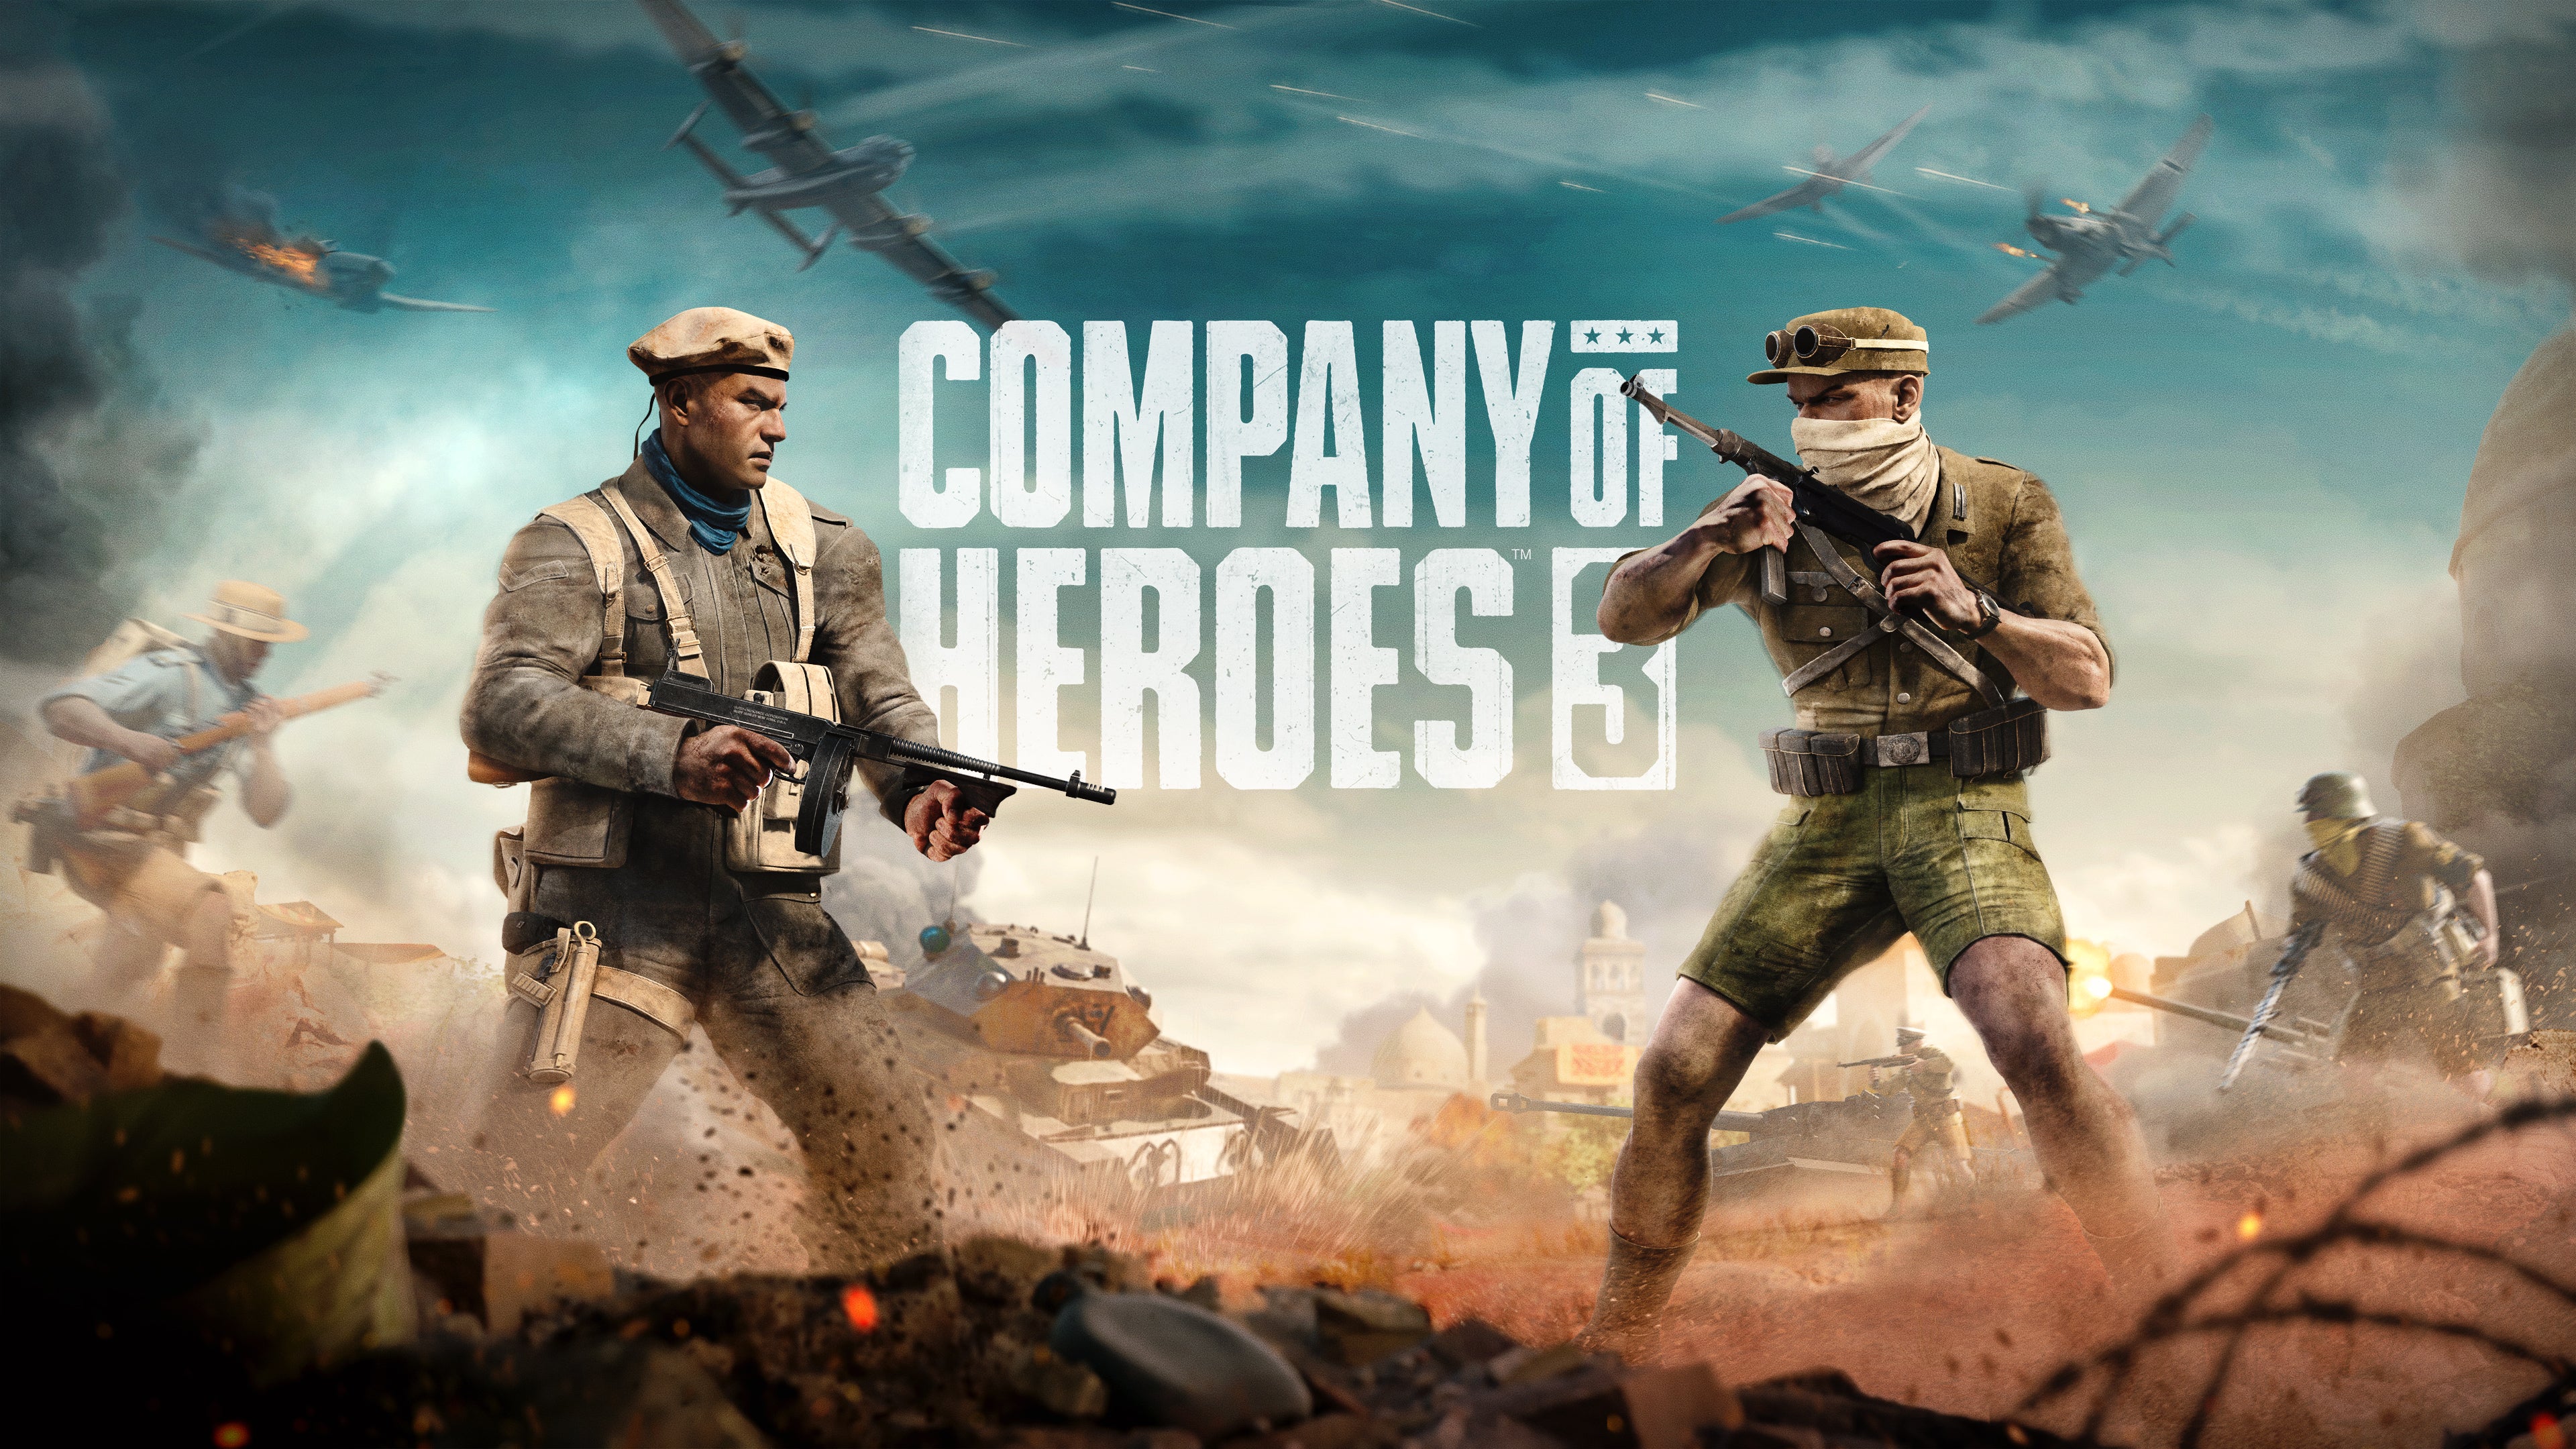 Company of Heroes 3 will eschew the notion of a 